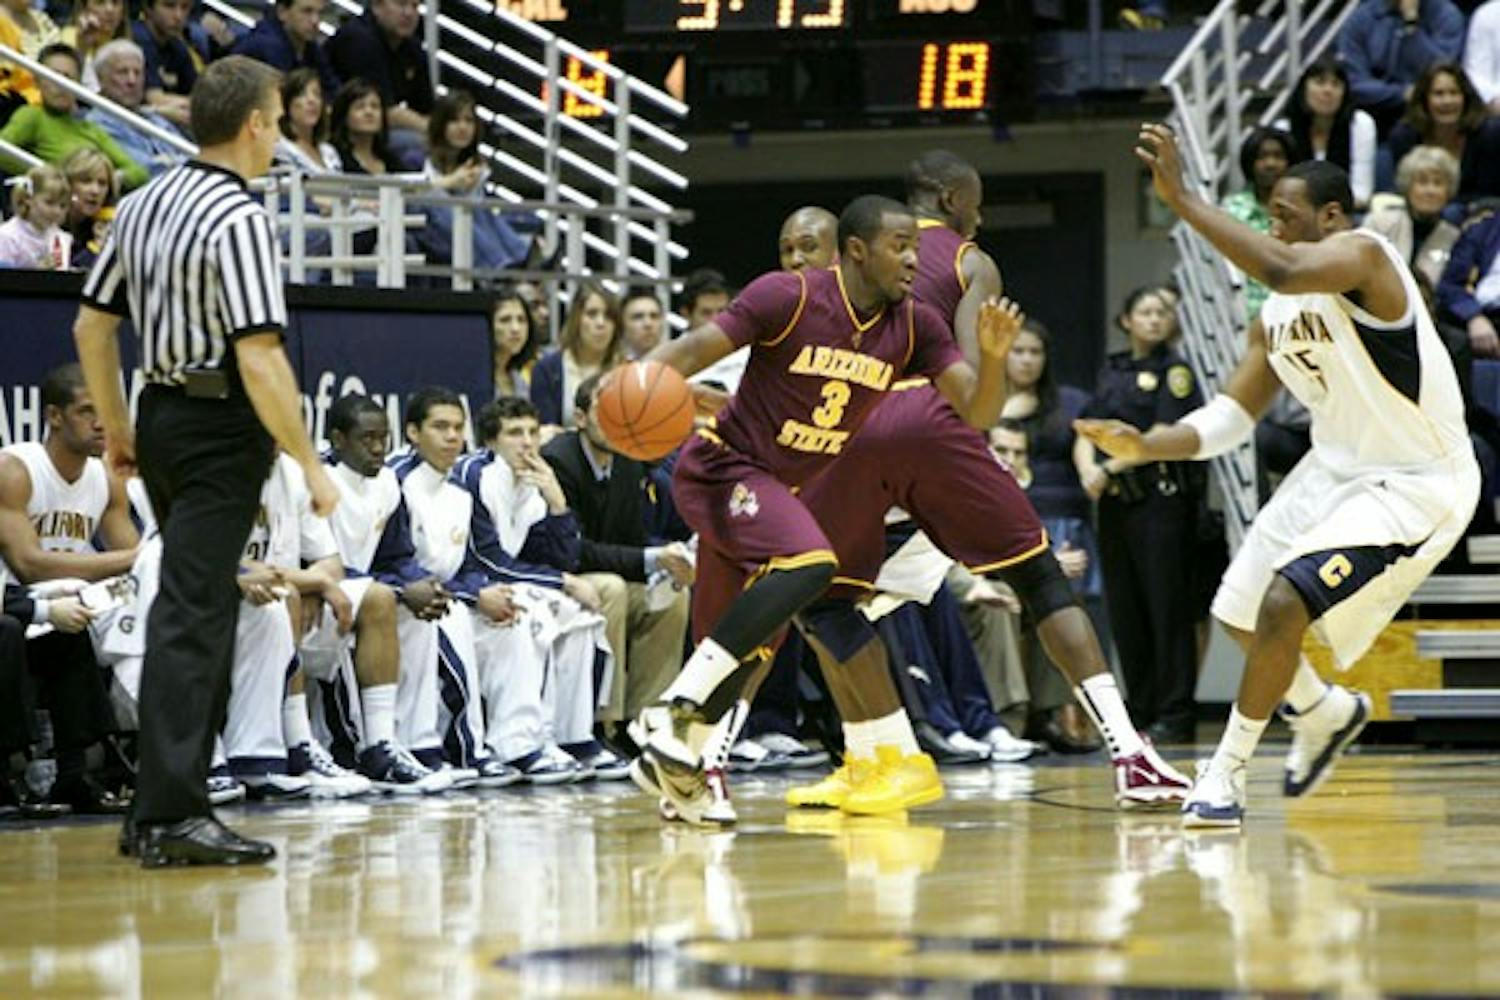 PICK AND ROLL: ASU junior guard Ty Abbott comes off of a screen set by senior center Eric Boateng during the Sun Devils’ 62-46 loss to California at Haas Pavilion on Saturday. (Photo by Anne Marie Schuler)